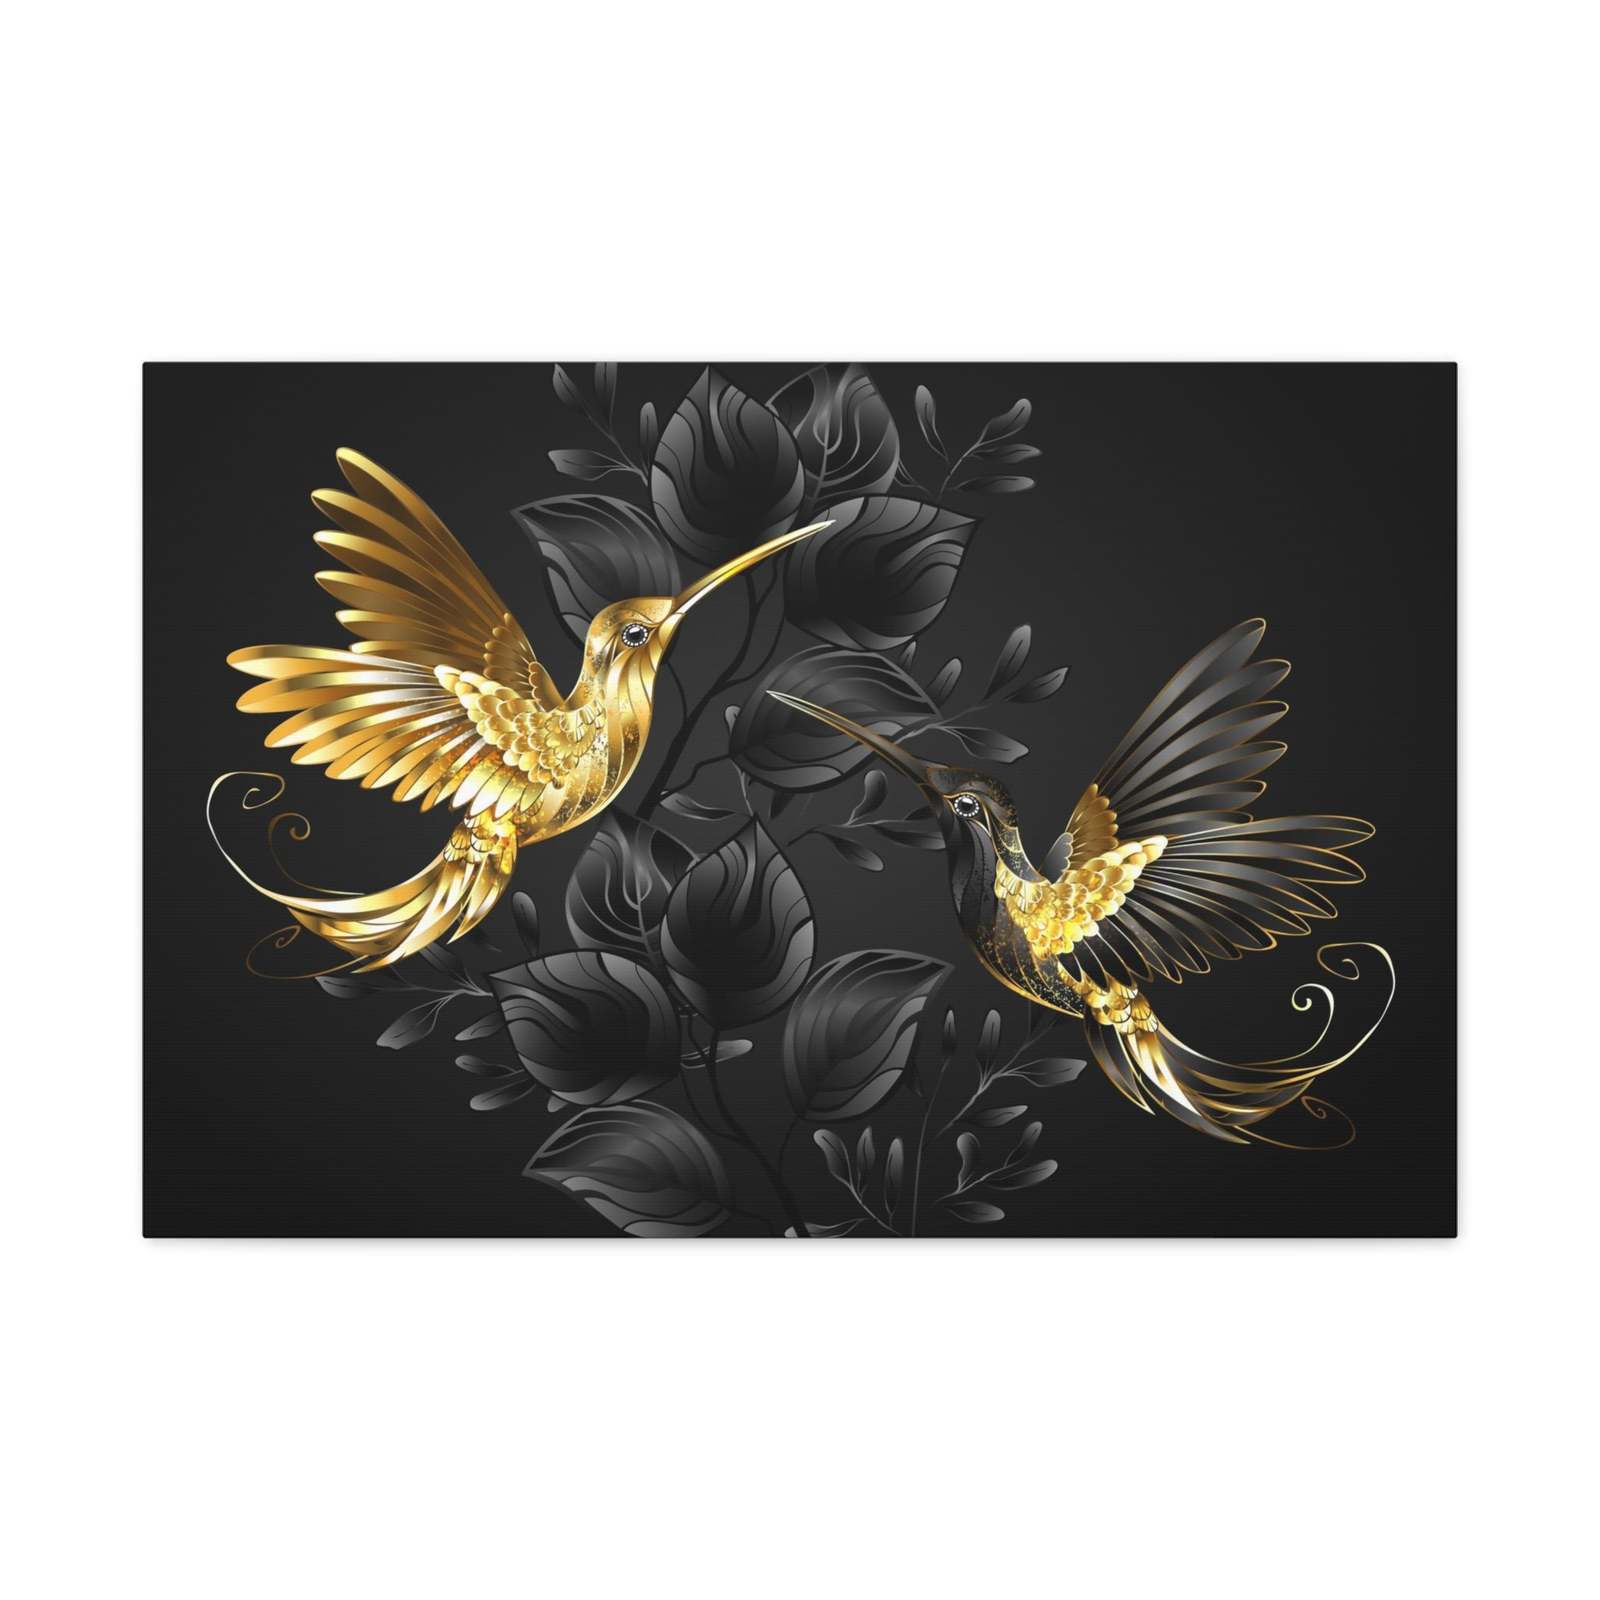 Black Gold Jewelry Hummingbirds With Flowers Canvas Wall Art for Home Decor Rea - $90.24 - $118.74